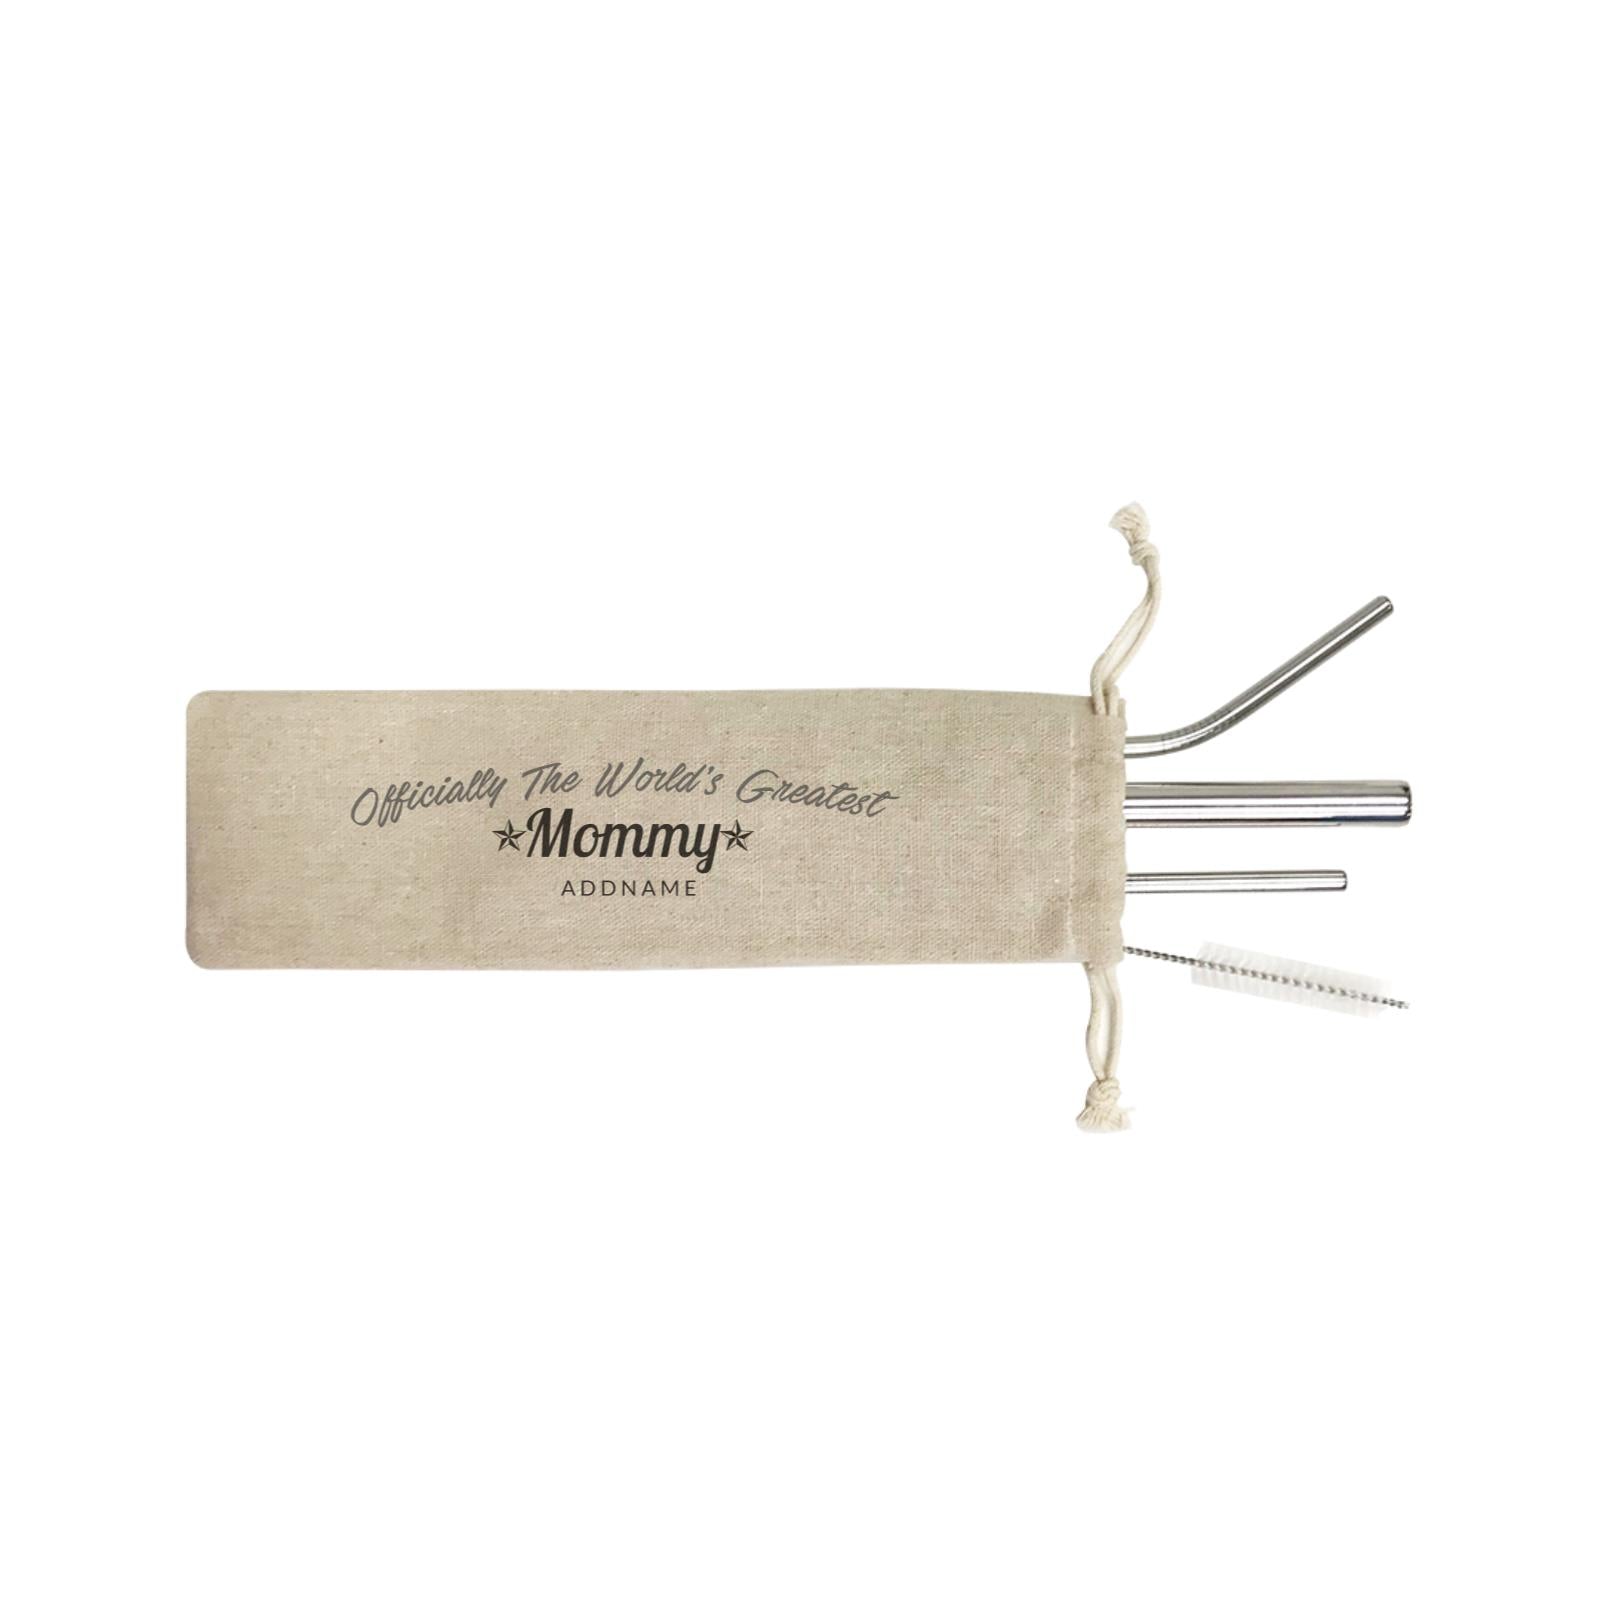 Officially Worlds Greatest Family Mommy Addname SB 4-In-1 Stainless Steel Straw Set in Satchel